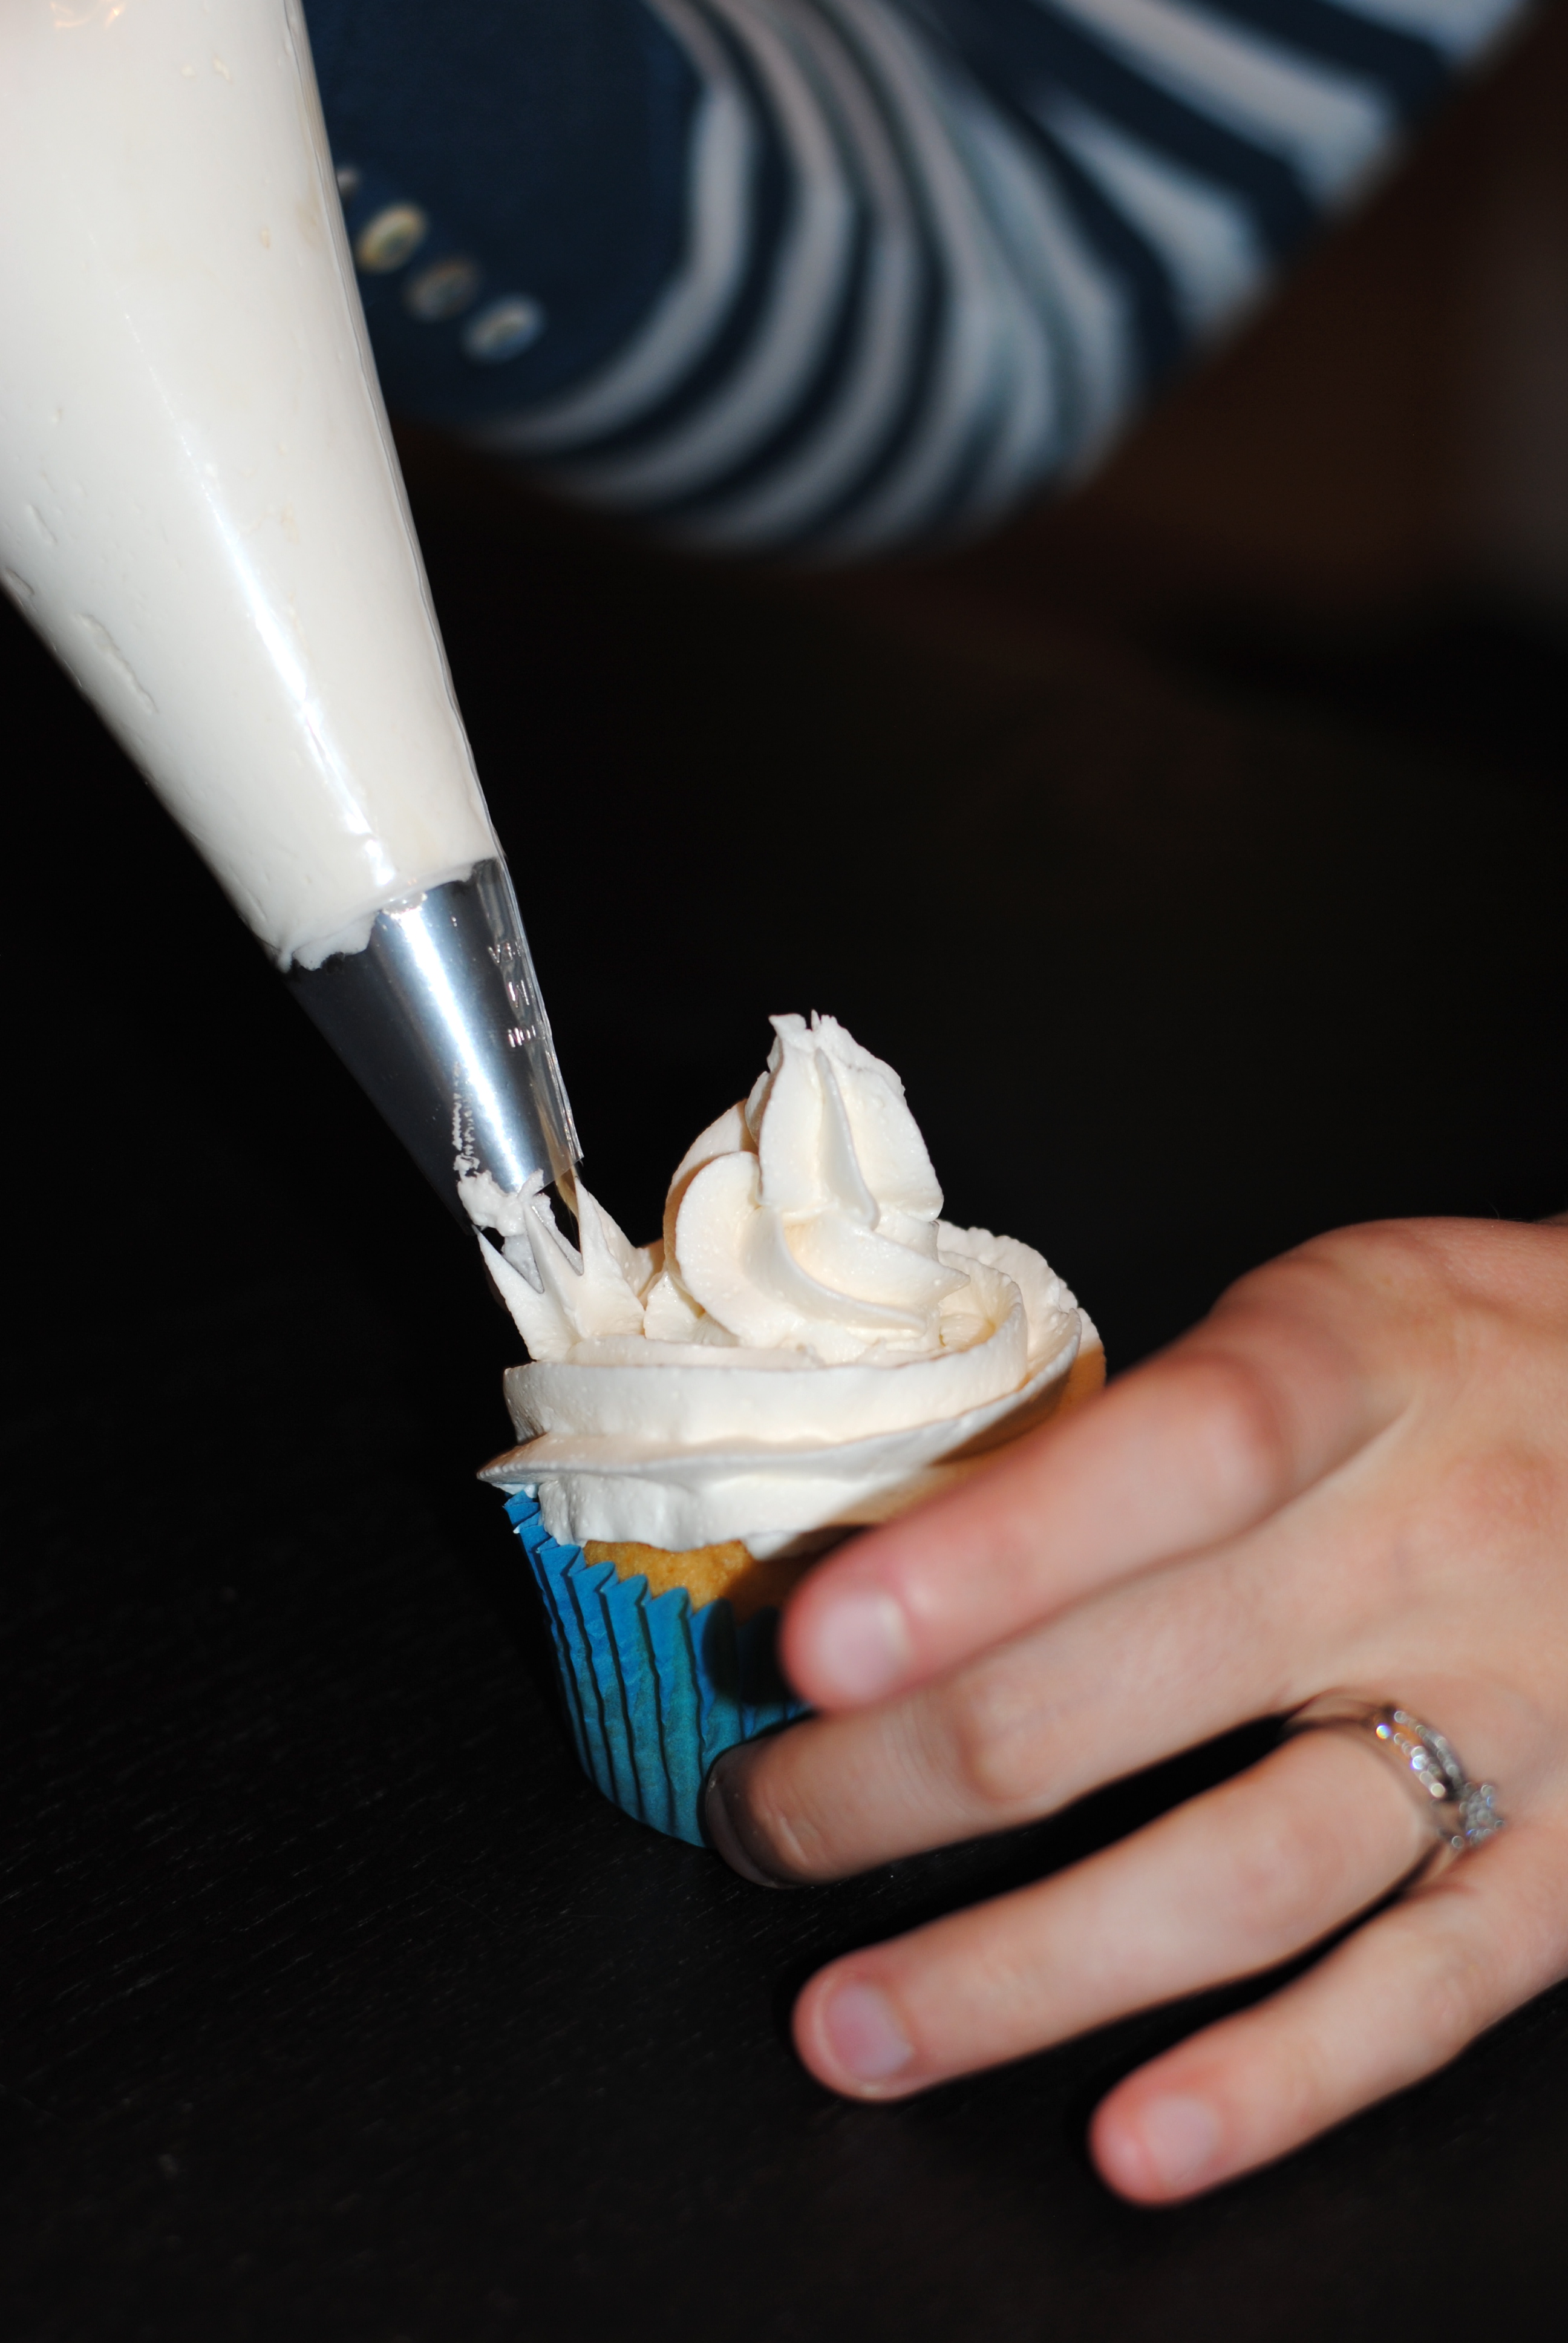 Frosting Cupcakes with Pastry Bag